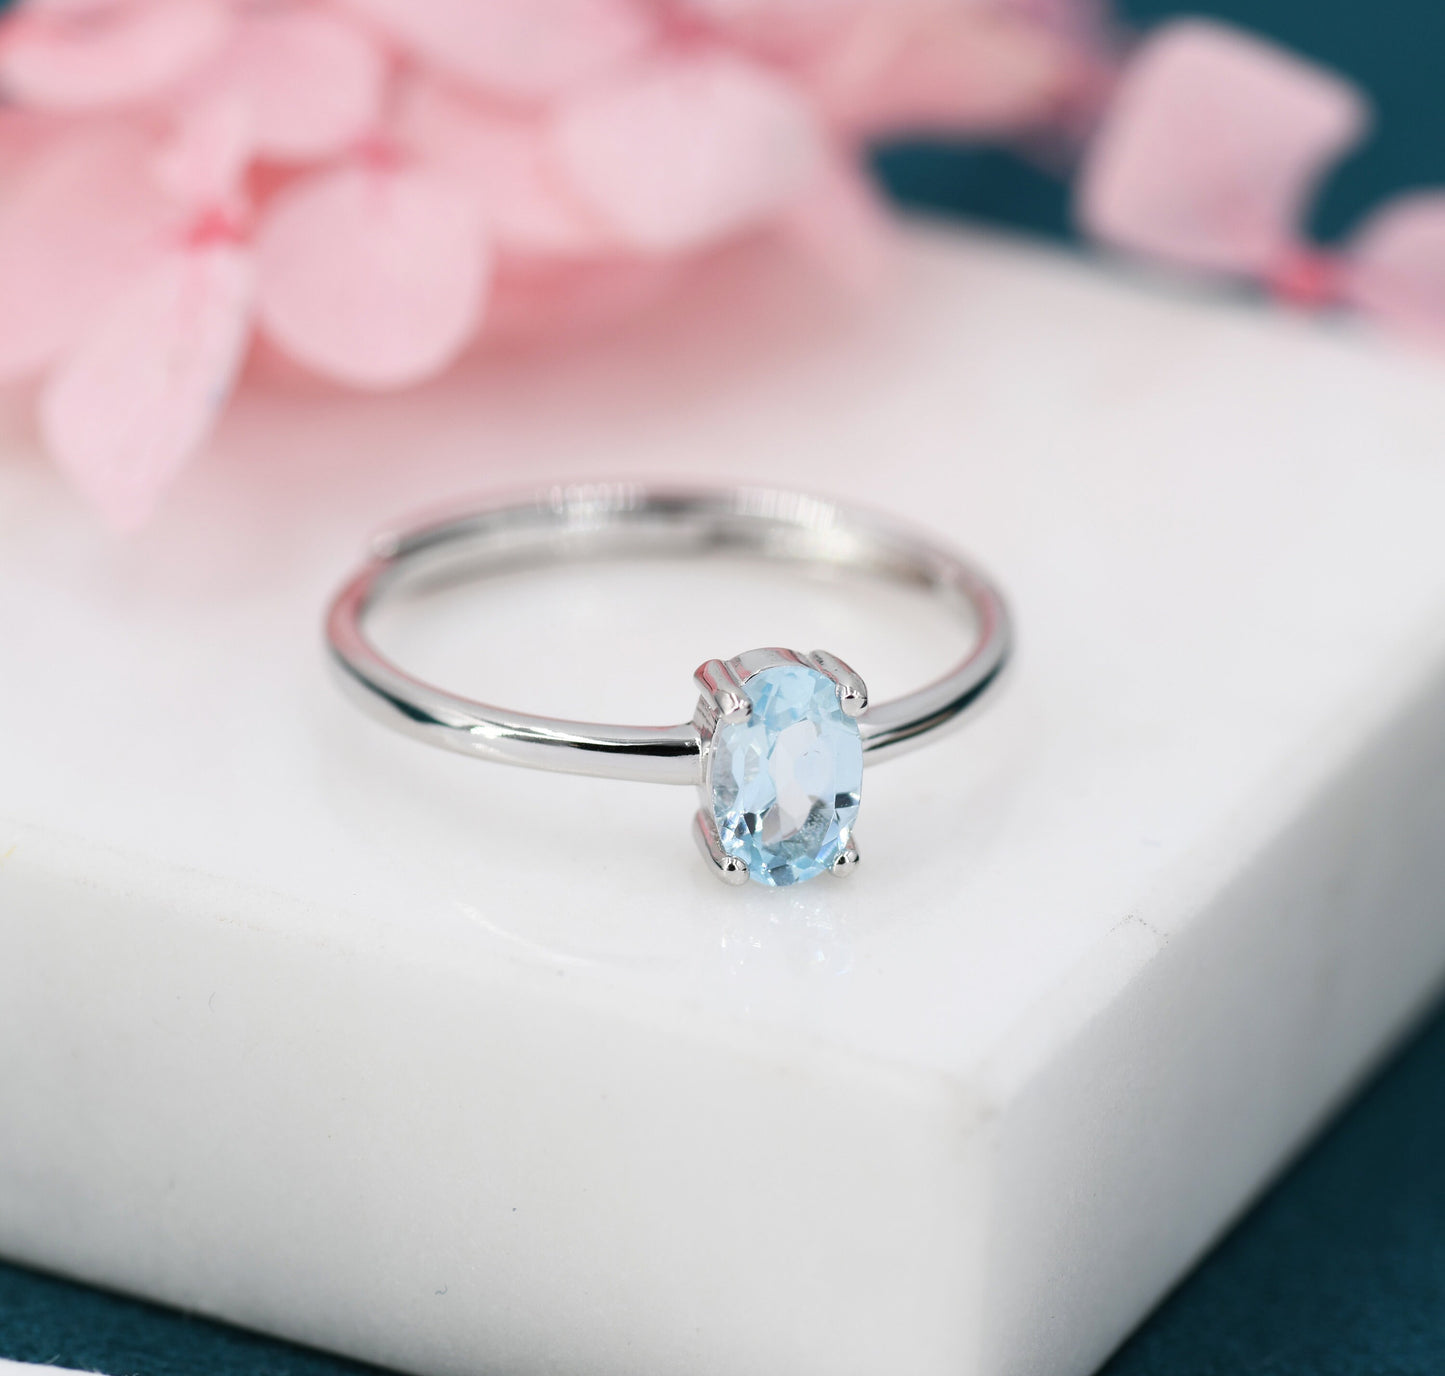 Natural Blue Topaz Oval Ring in Sterling Silver,  4x6mm, Prong Set Oval Cut, Adjustable Size, Genuine Topaz Ring